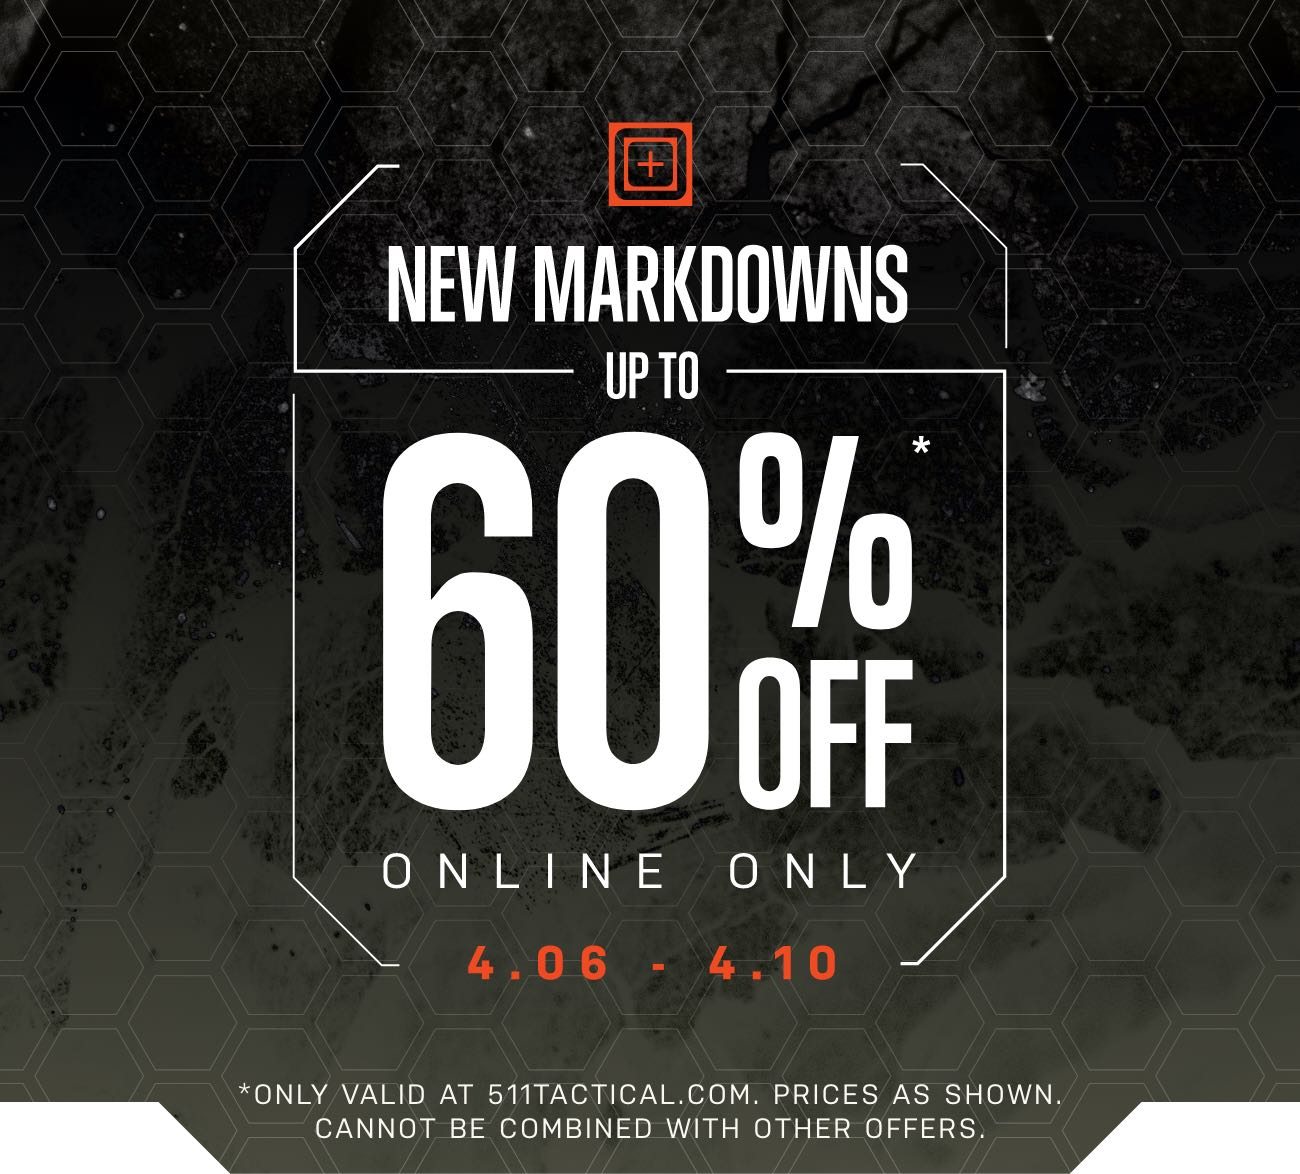 New Markdowns up to 60% Off